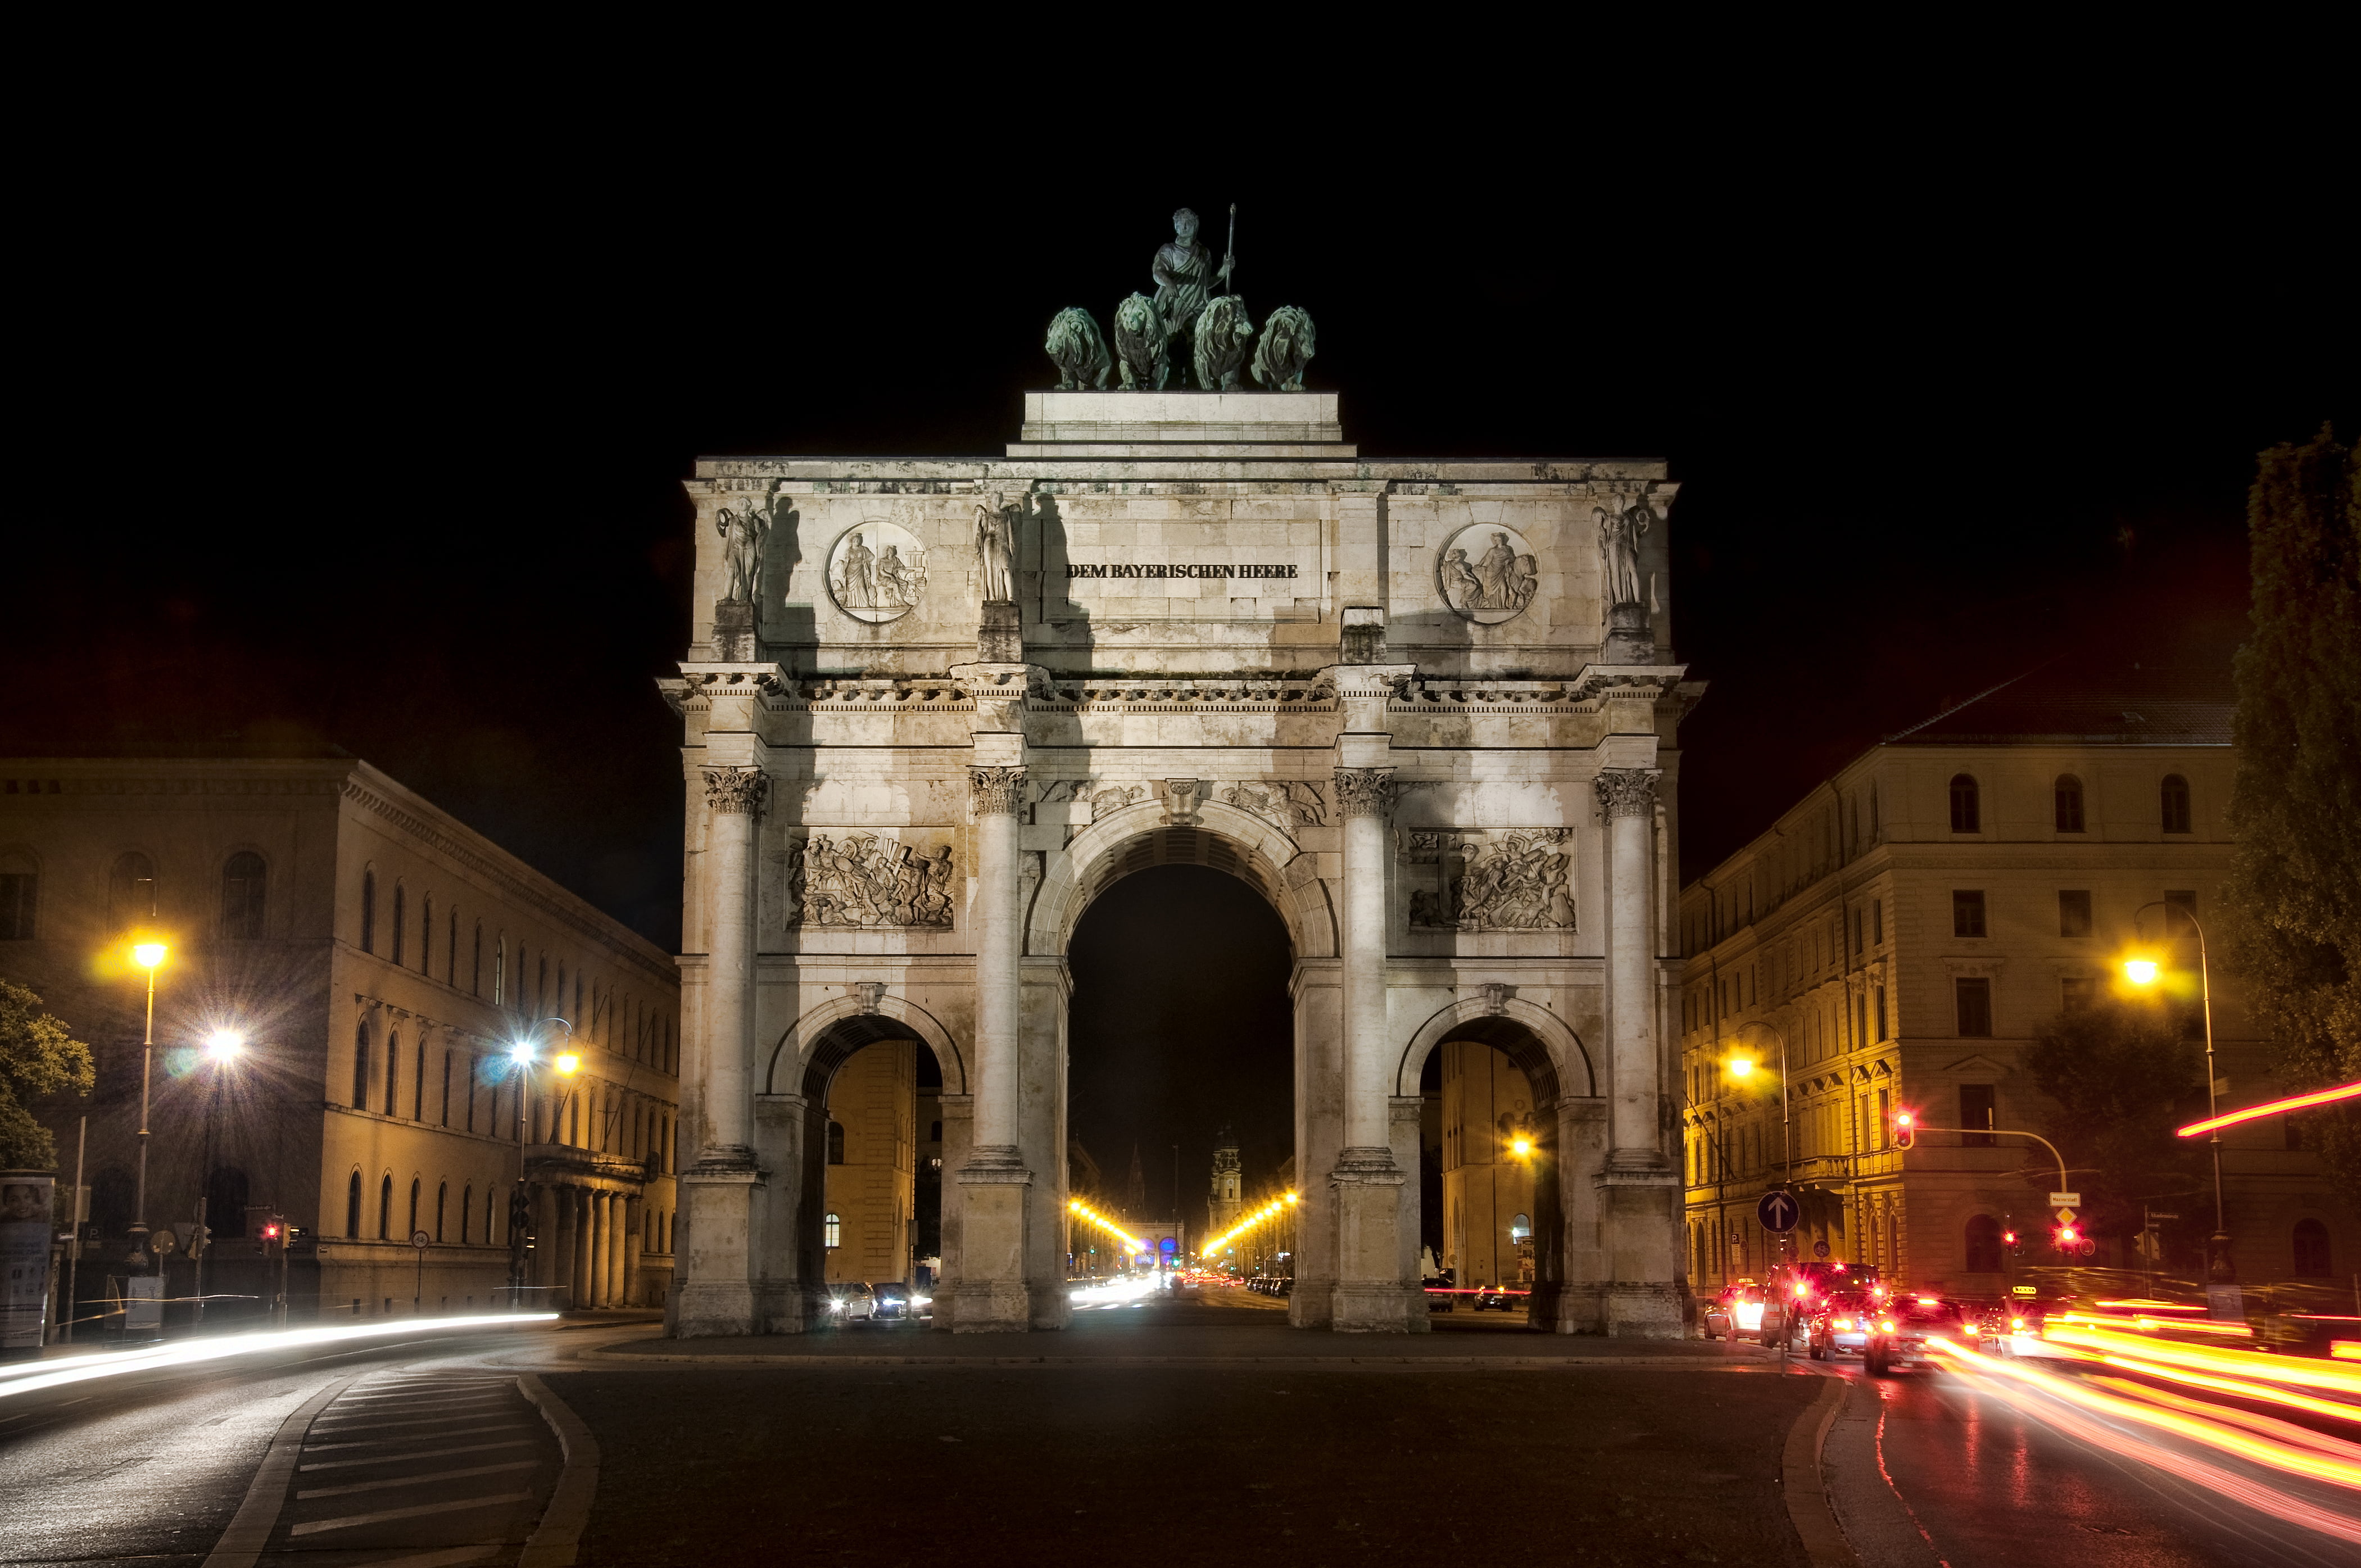 Gateway of India, road, machine, building, lights, Night, Victory gate